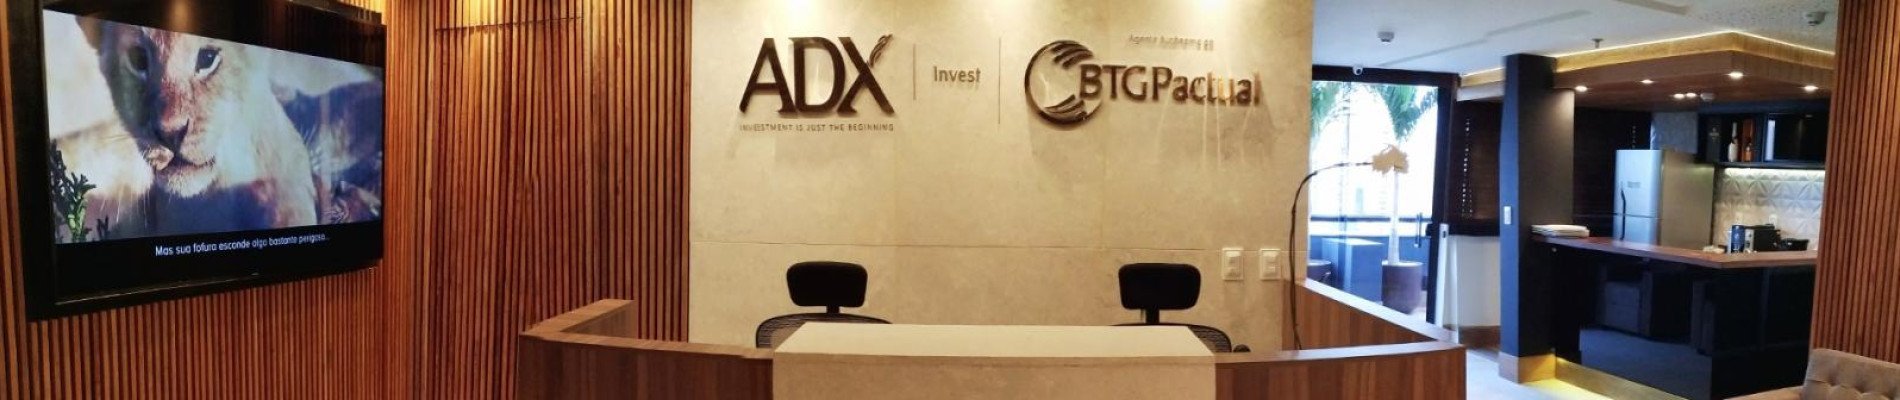 A ADX Invest